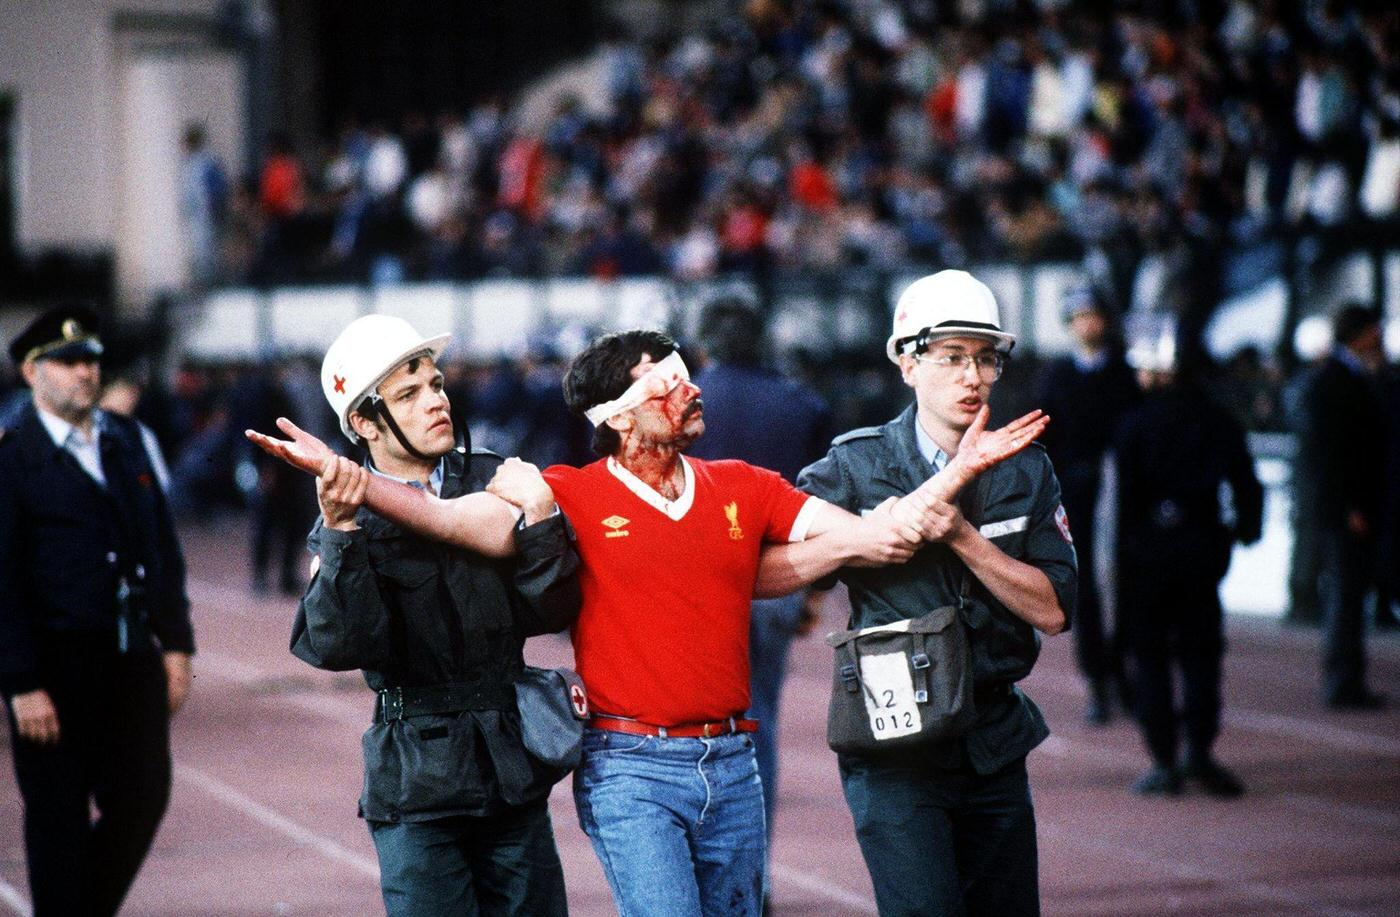 Injured Liverpool fan led away by medical staff at Heysel Stadium, European Cup Final, 1985.